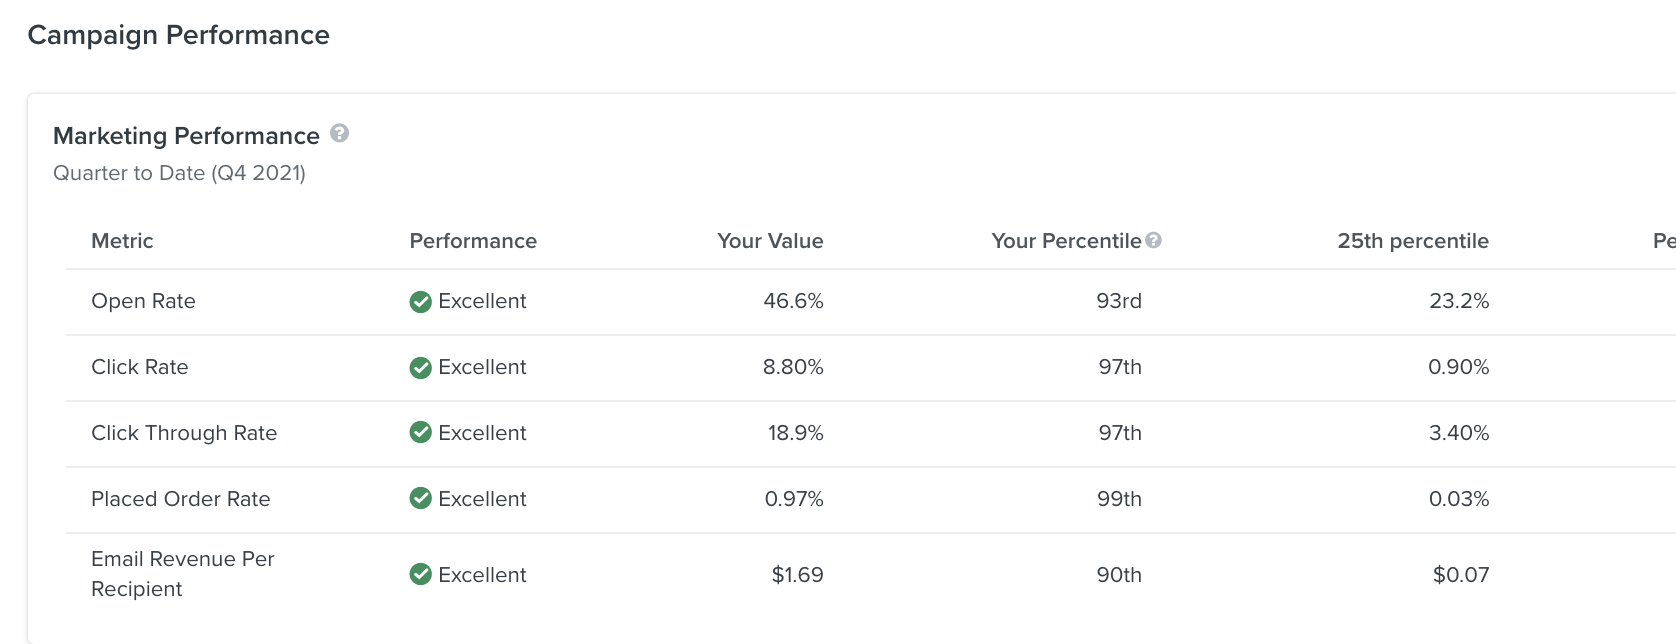 Inside the Campaign Performance page showing metrics, benchmark performance, your values, percentile and peer median